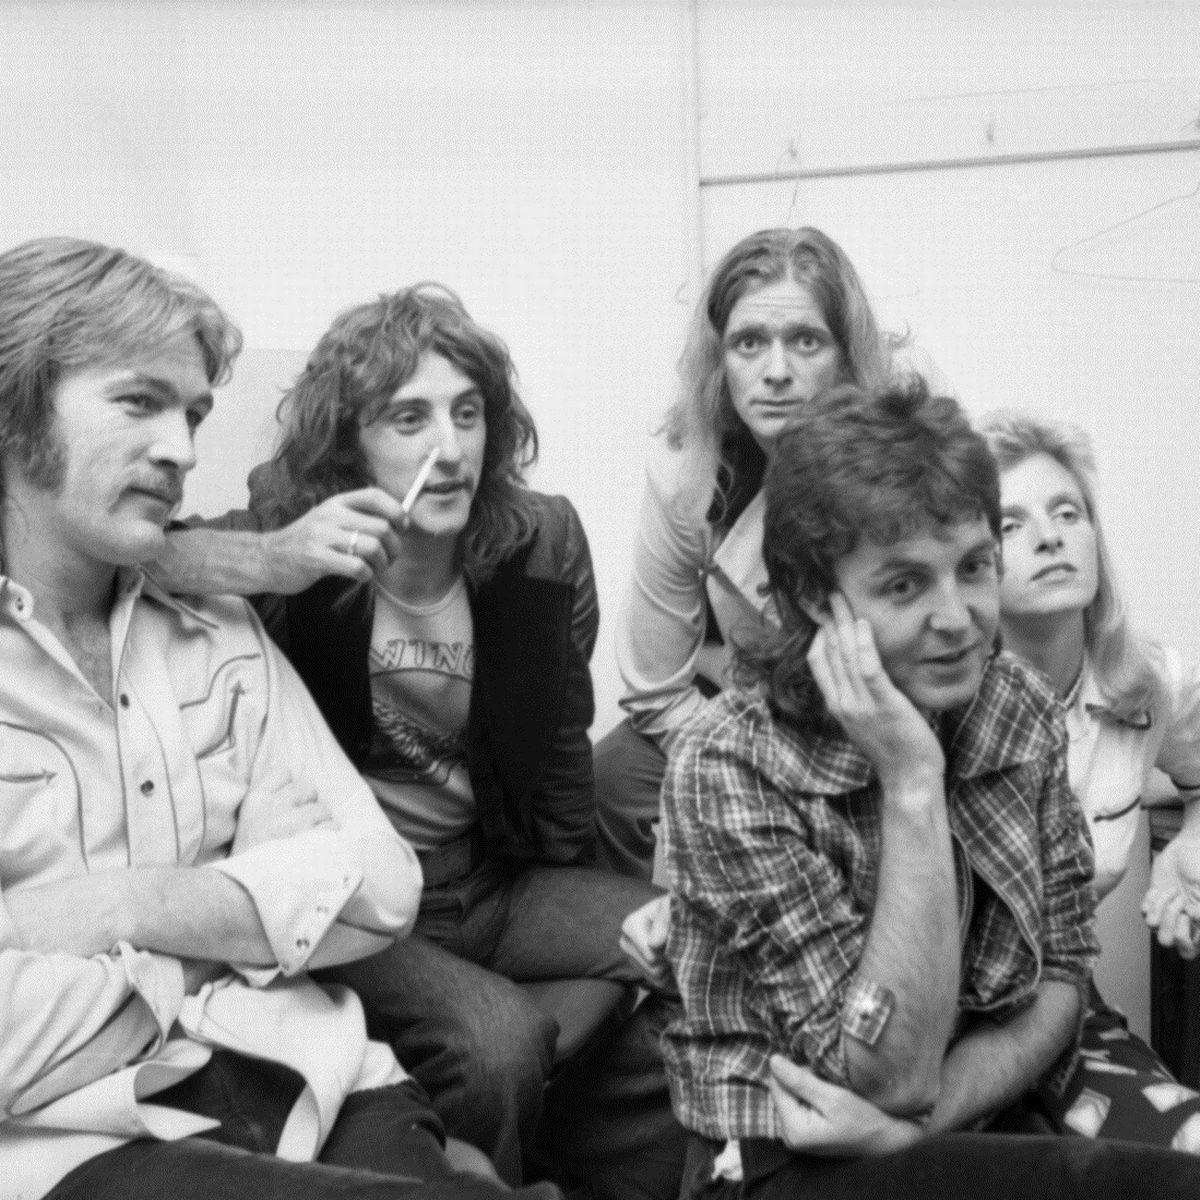 Paul McCartney And Wings Chilling Backstage Wallpaper